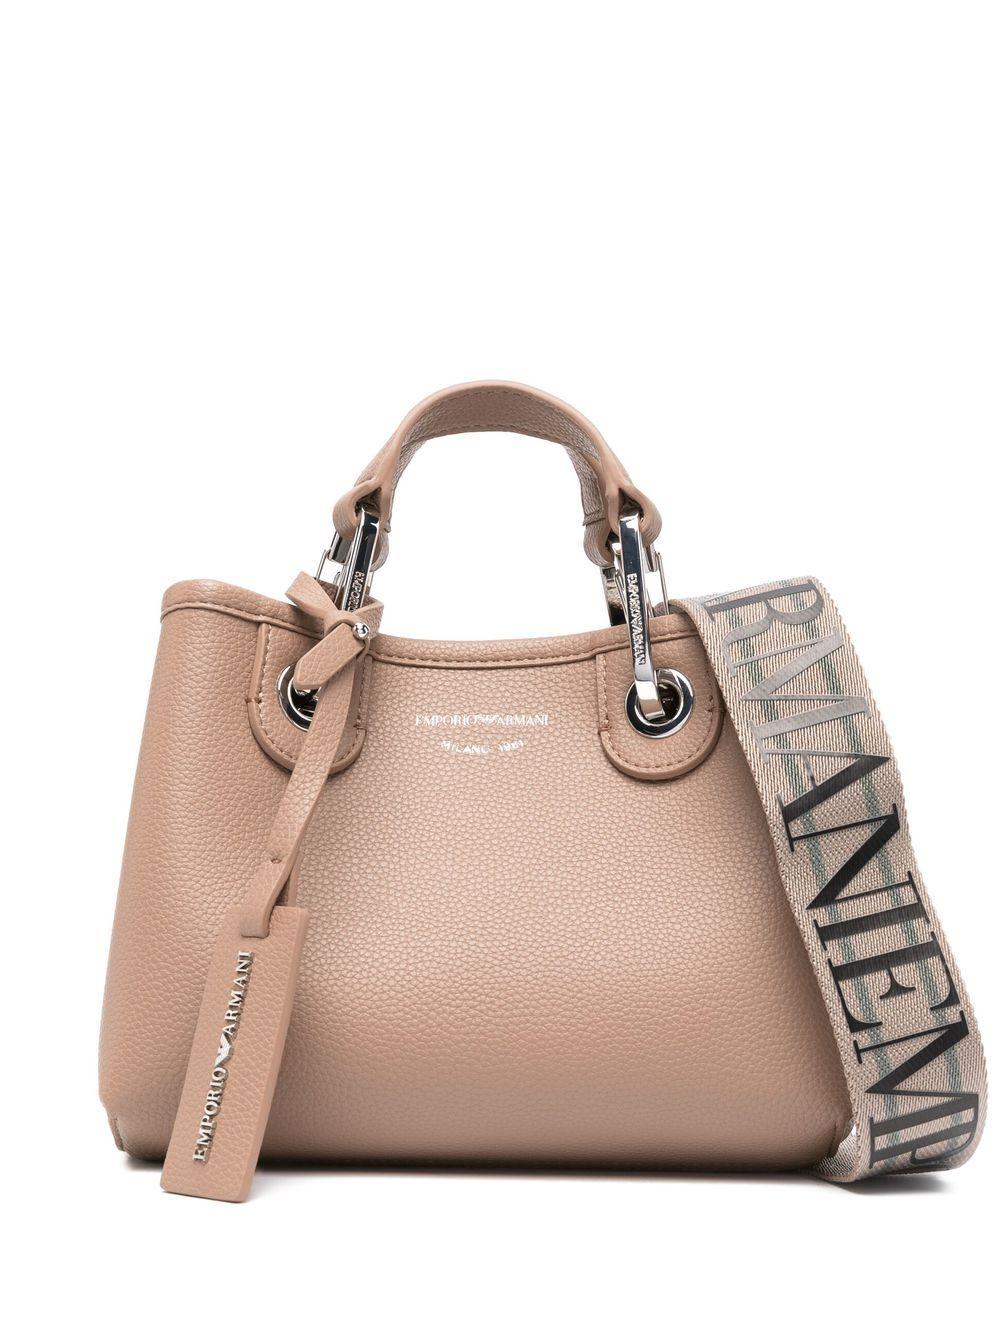 Emporio Armani Small Shopping Bag in Natural | Lyst